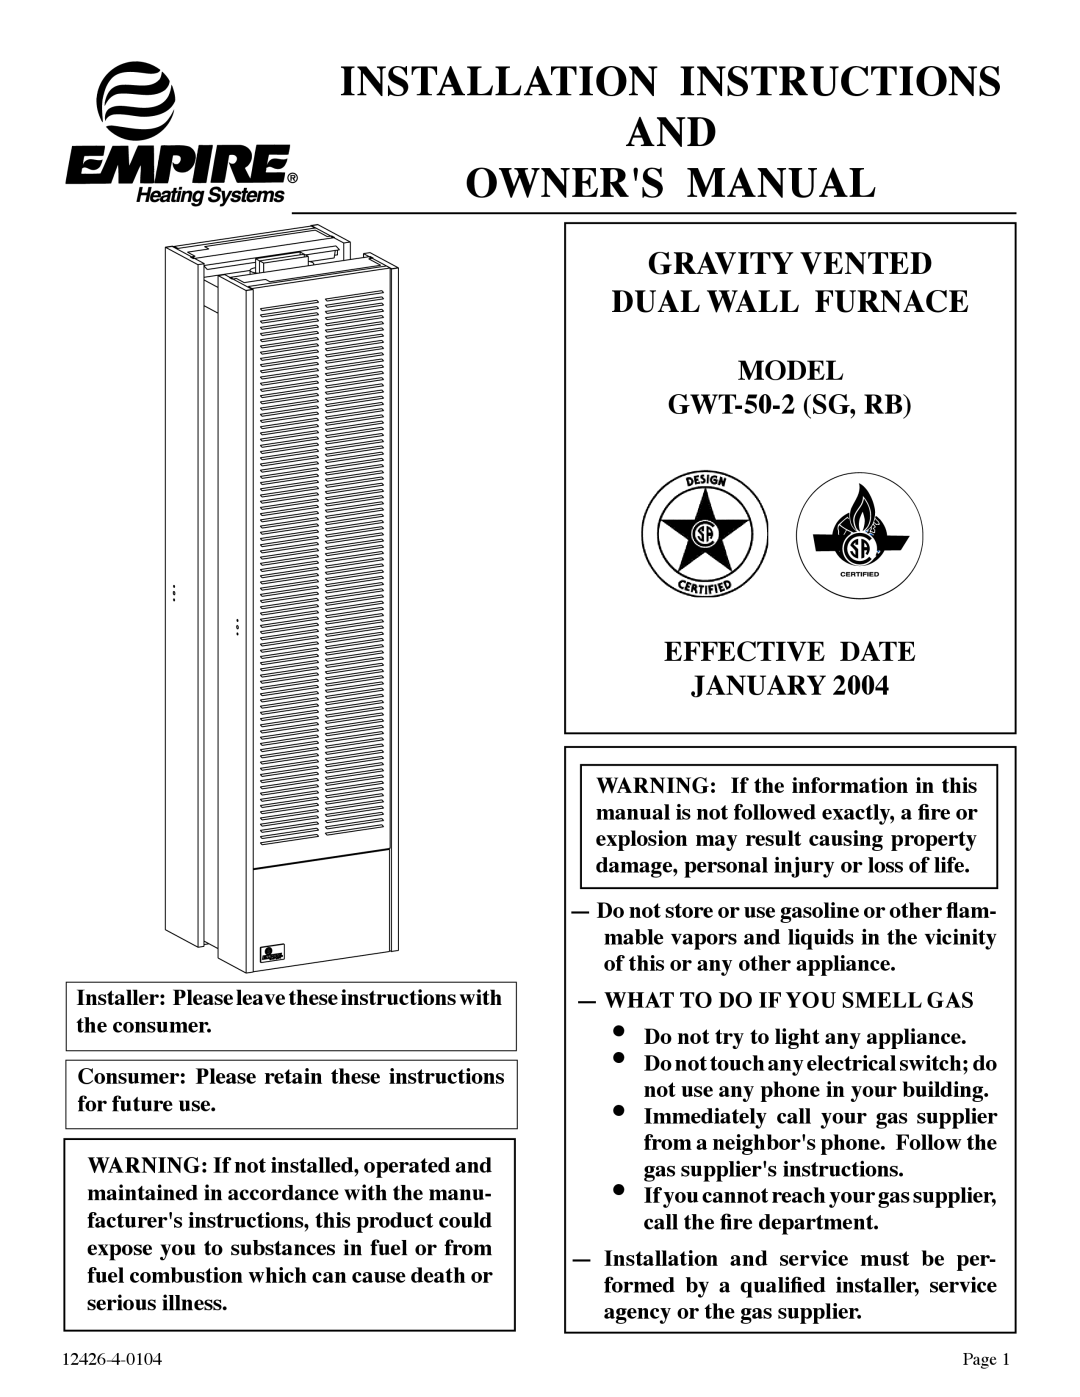 Empire Comfort Systems RB), GWT-50-2 installation instructions Gravity Vented Dual Wall Furnace 